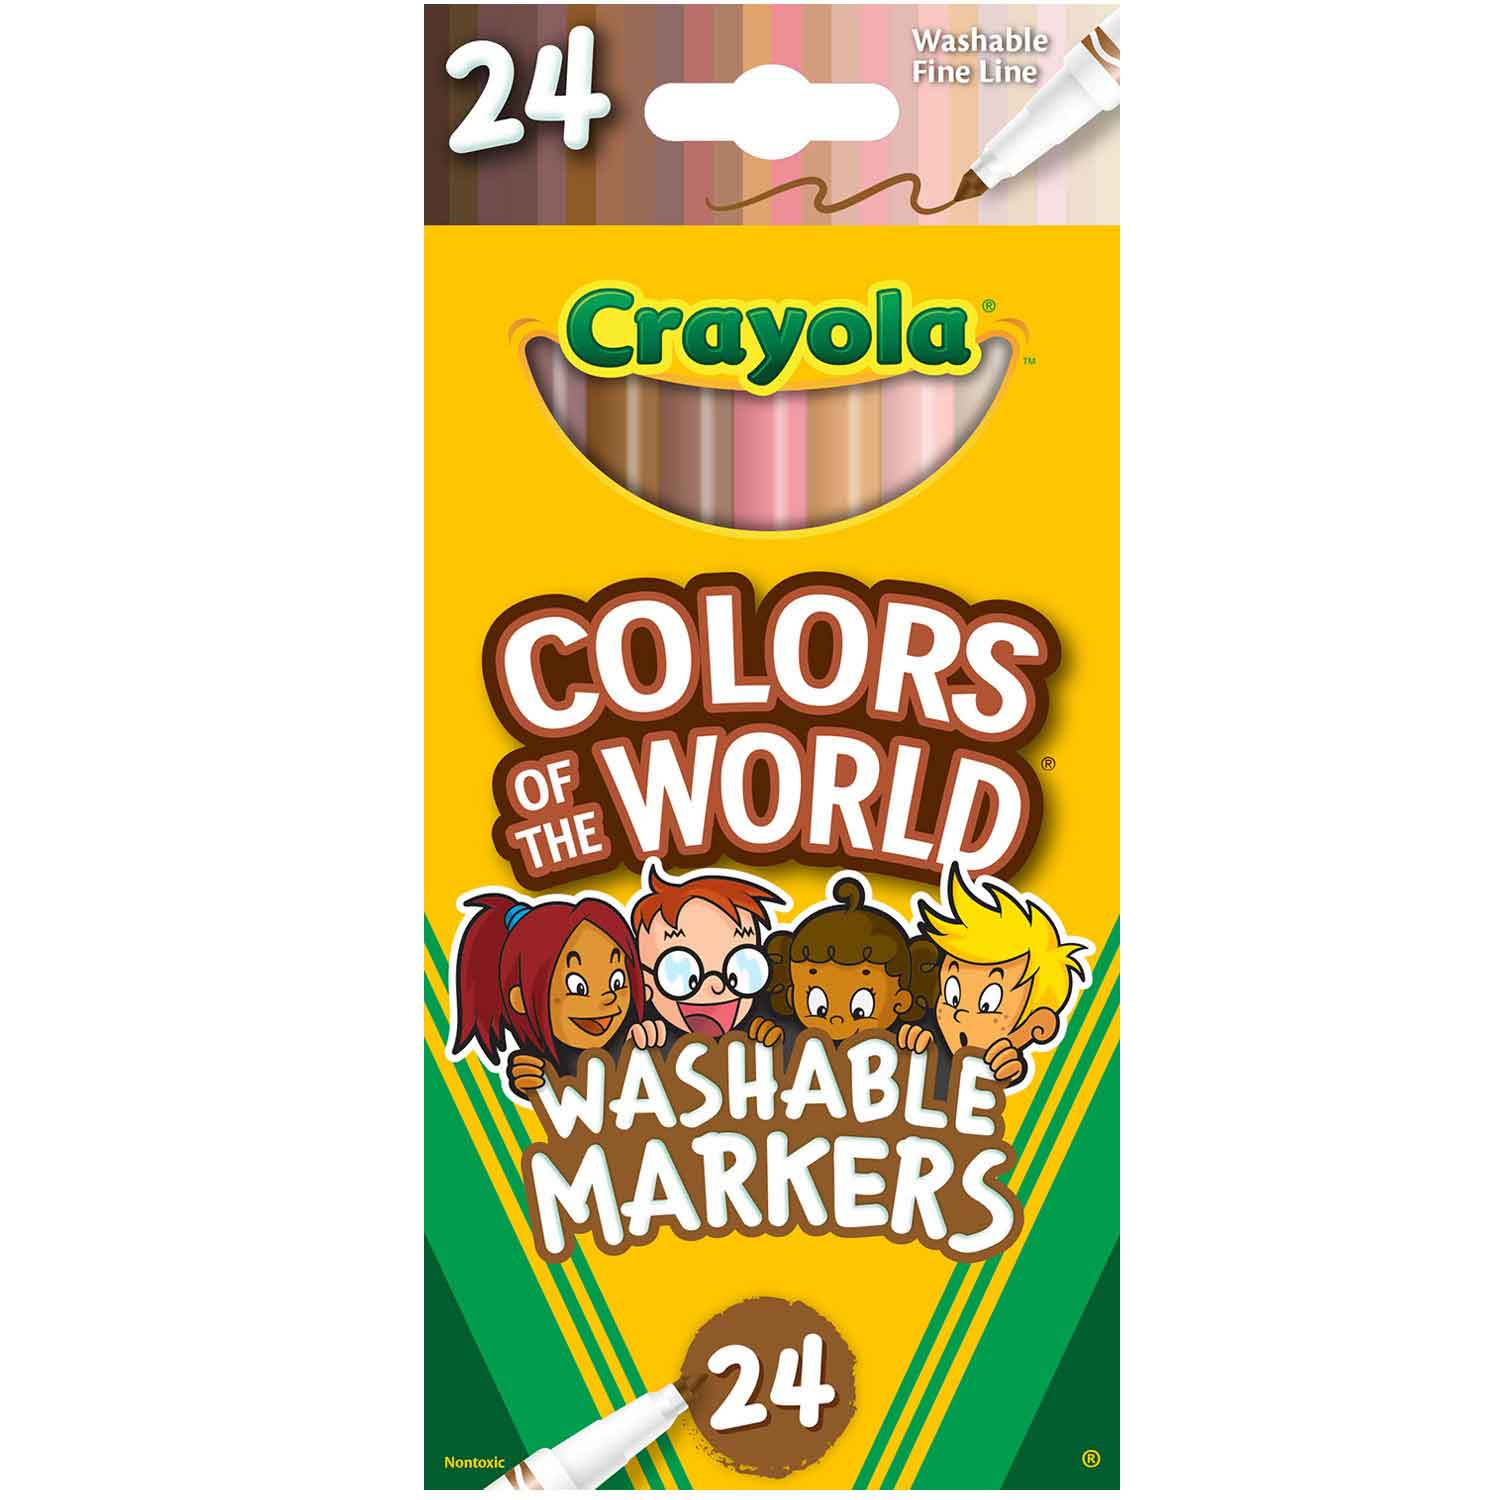  Crayola Washable Markers - Brown (12ct), Kids Broad Line Markers,  Bulk Markers for Classrooms & Teachers : Toys & Games